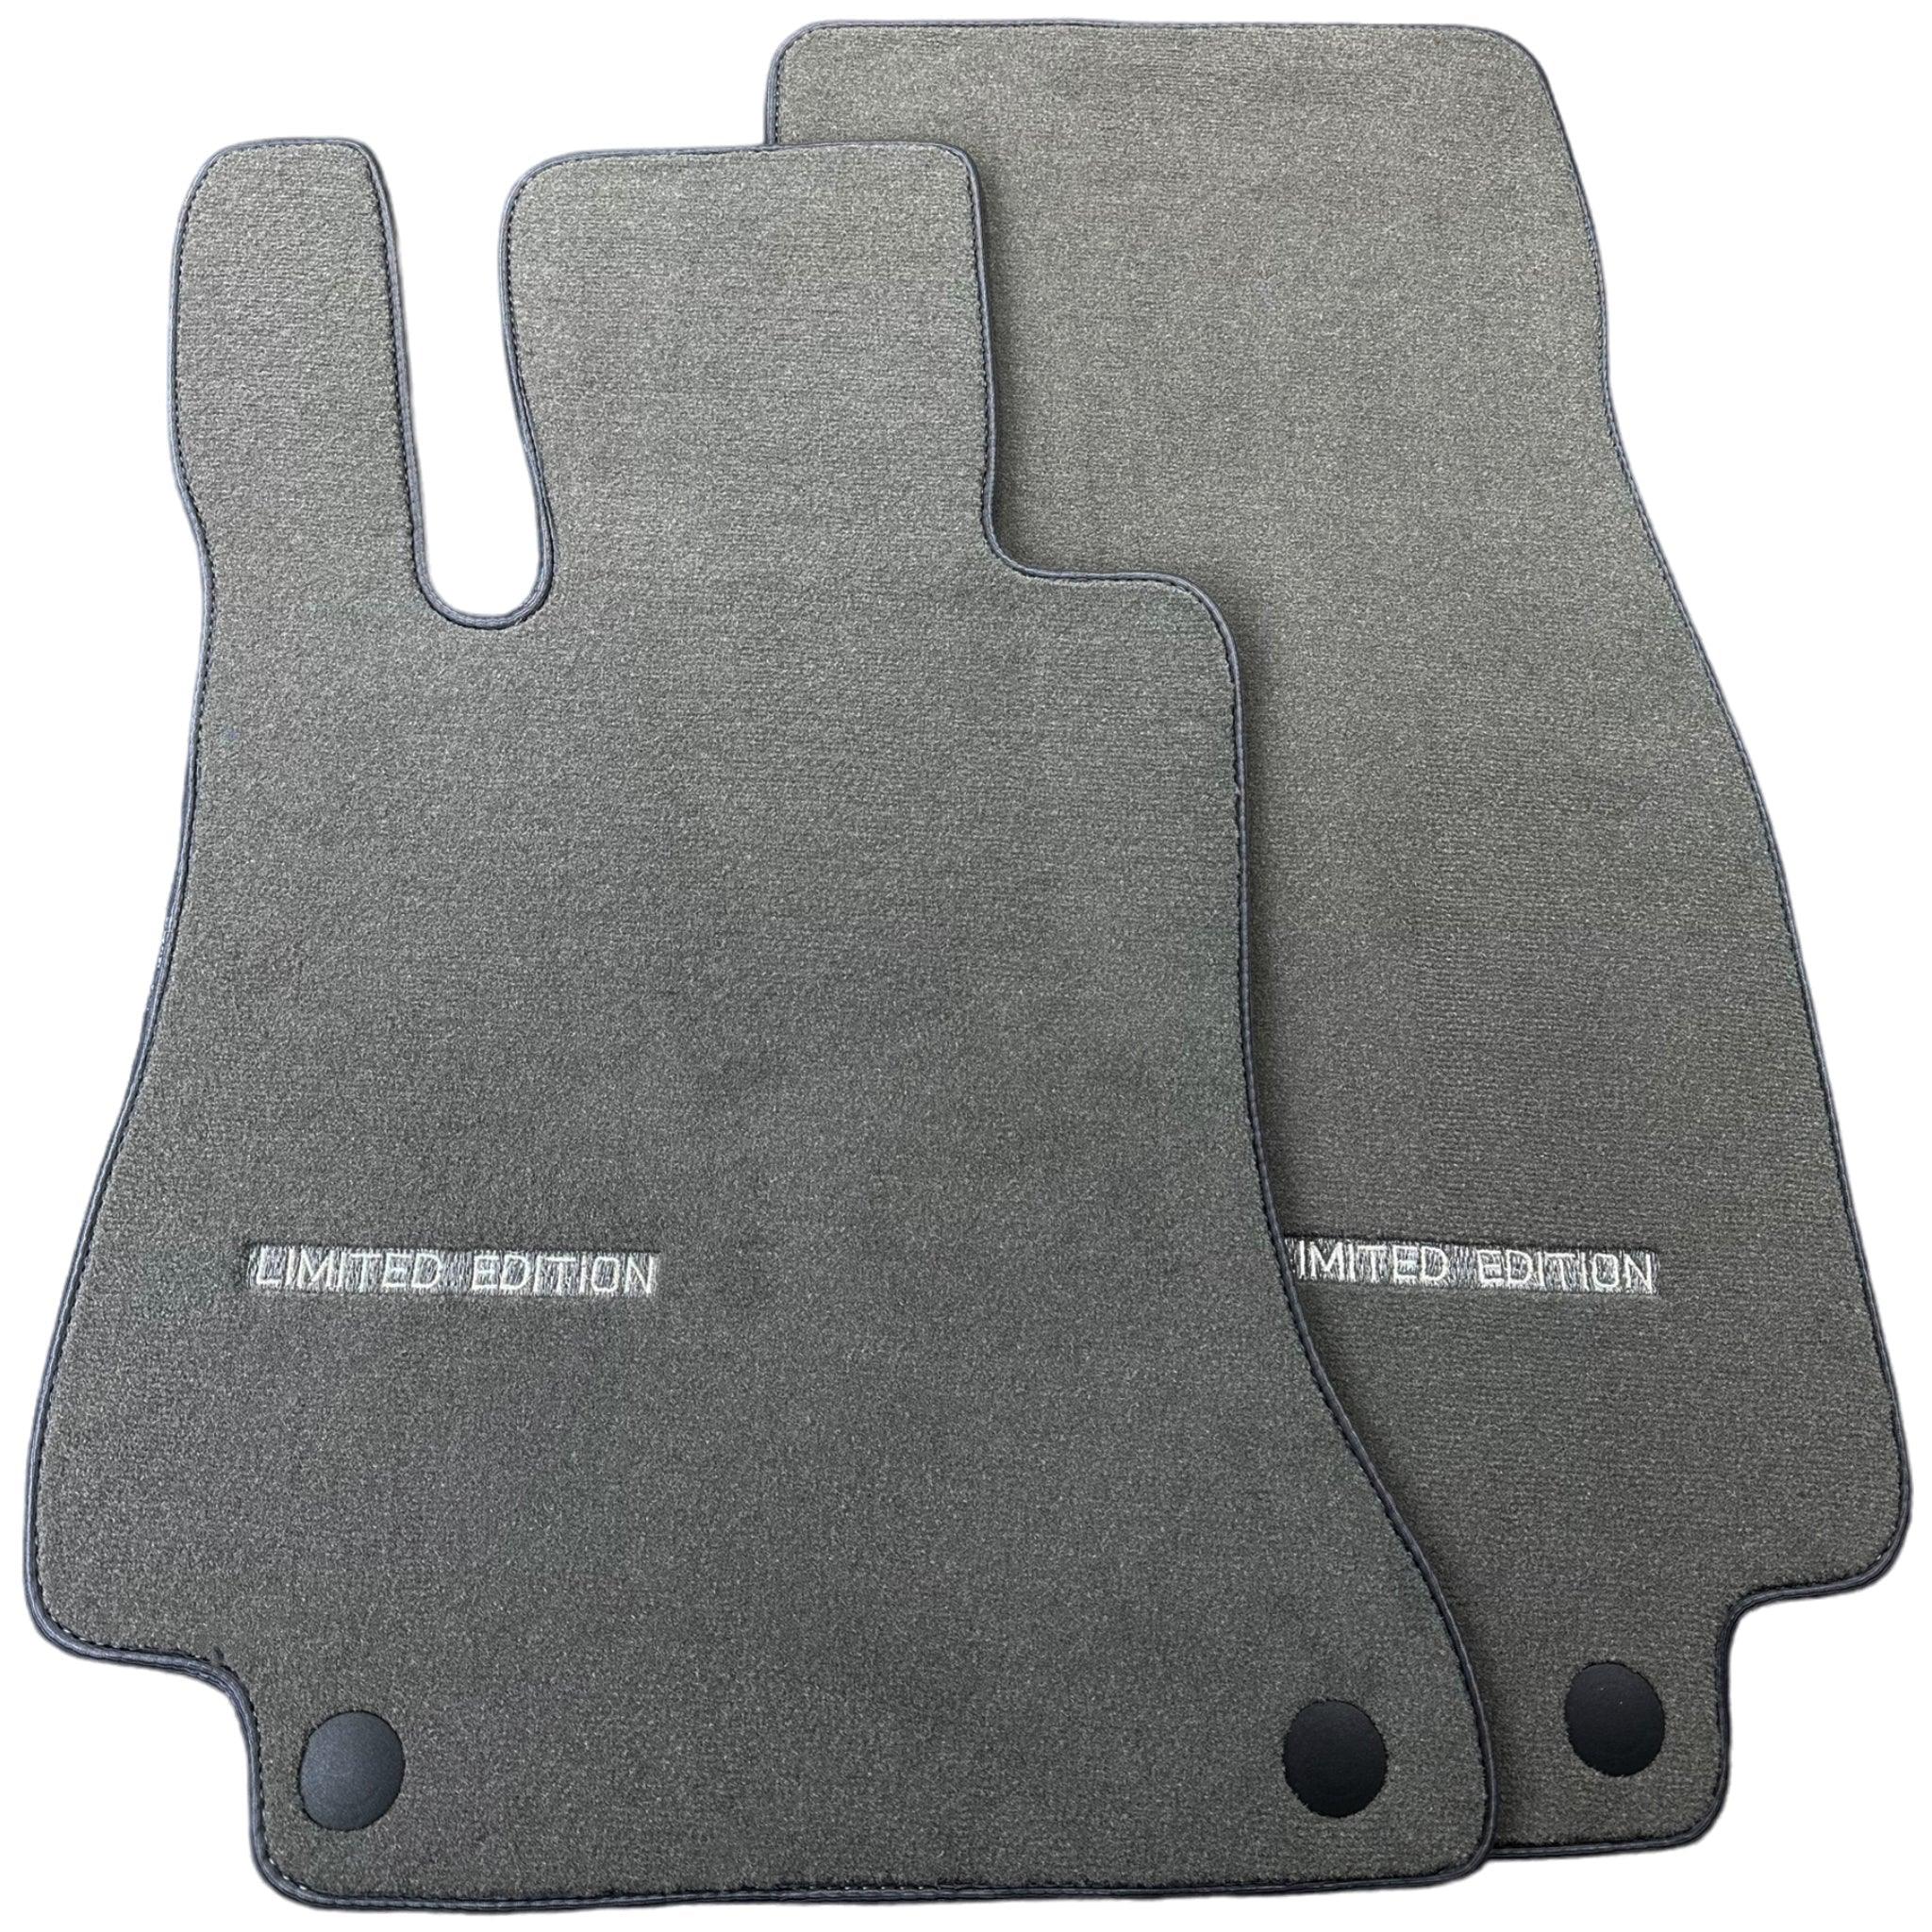 Gray Floor Mats For Mercedes Benz E-Class C238 Coupe (2017-2023) | Limited Edition